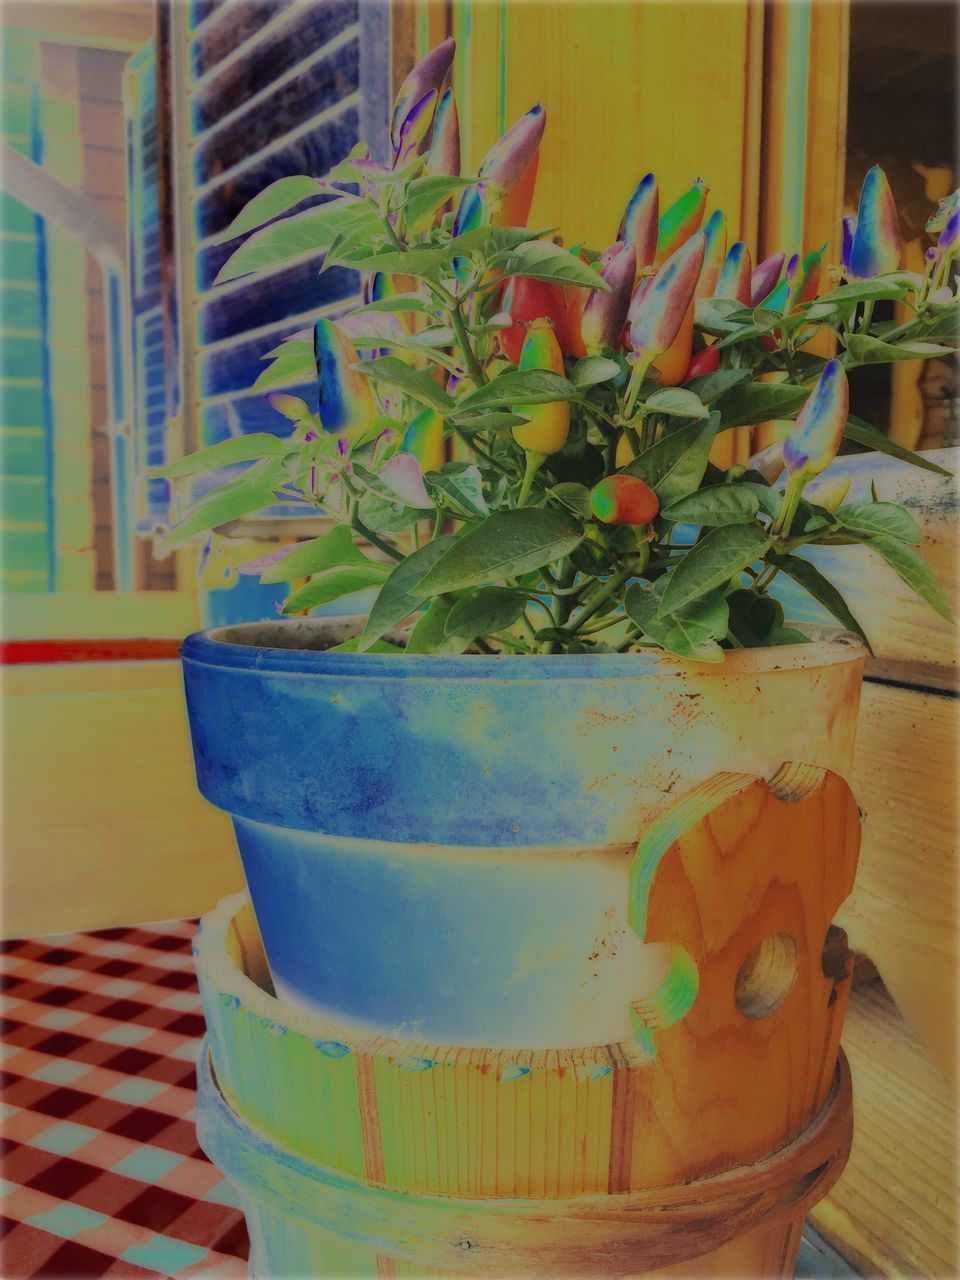 CLOSE-UP OF POTTED PLANTS ON TABLE